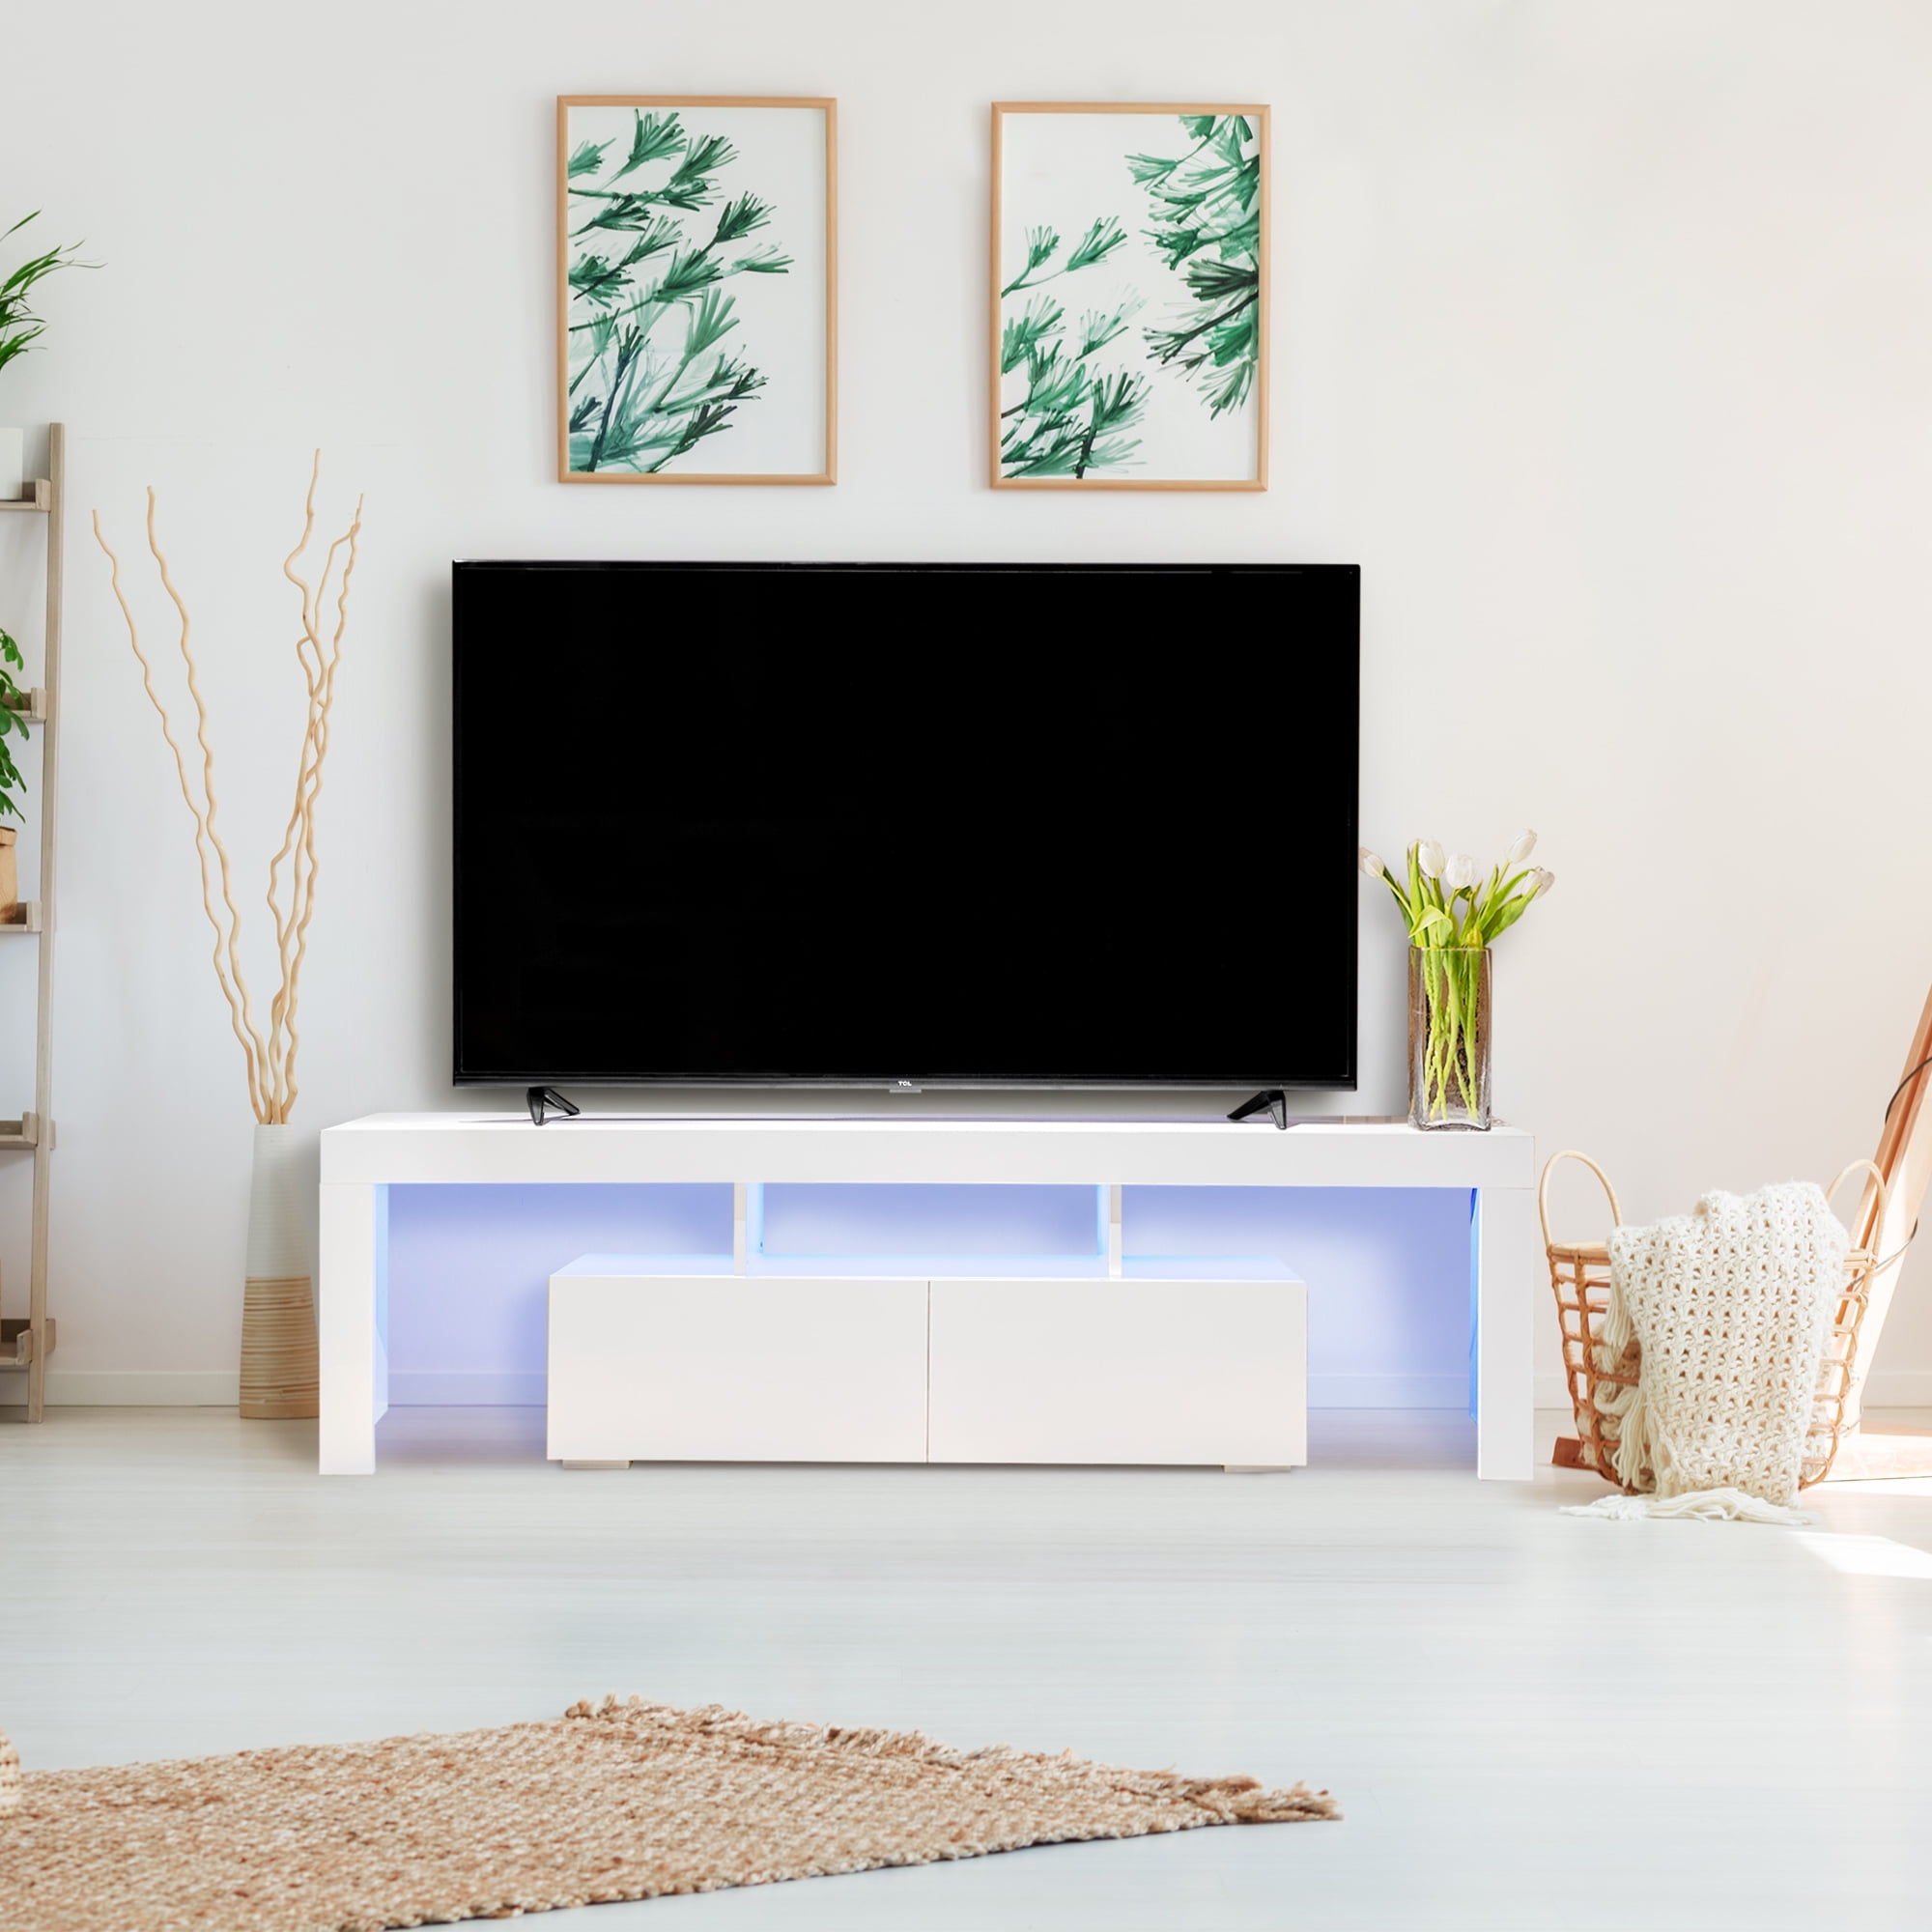 Details about   63" High Gloss TV Stand Unit Entertainment Center LED Shelf 2 Large Drawer White 